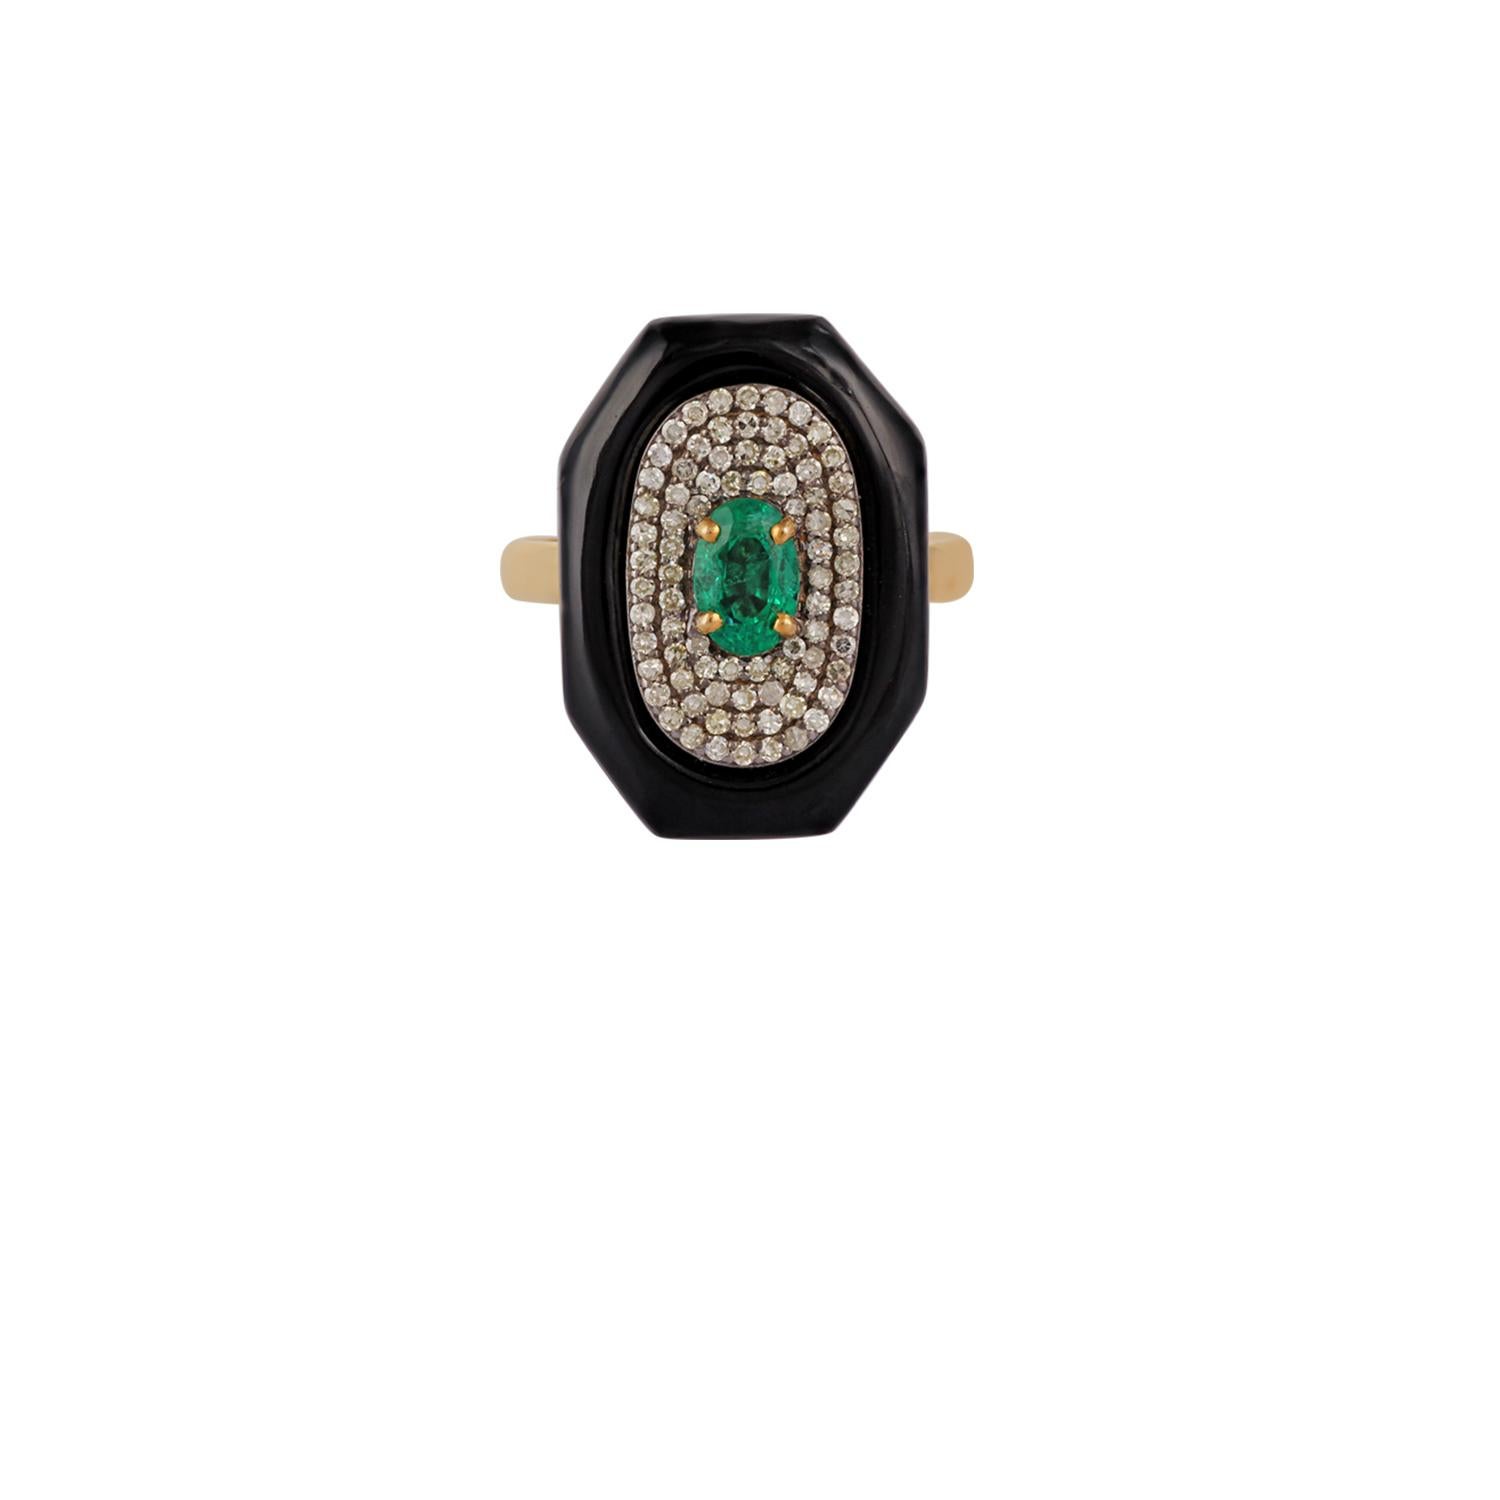 This is an elegant emerald, Black & diamond ring studded in 18k gold with 1 piece of Oval Cut  shaped Zambian emerald weight 0.59 carat which is surrounded Black onyx weight 5.97 carat & round shaped diamonds weight 0.35 carat, this entire ring